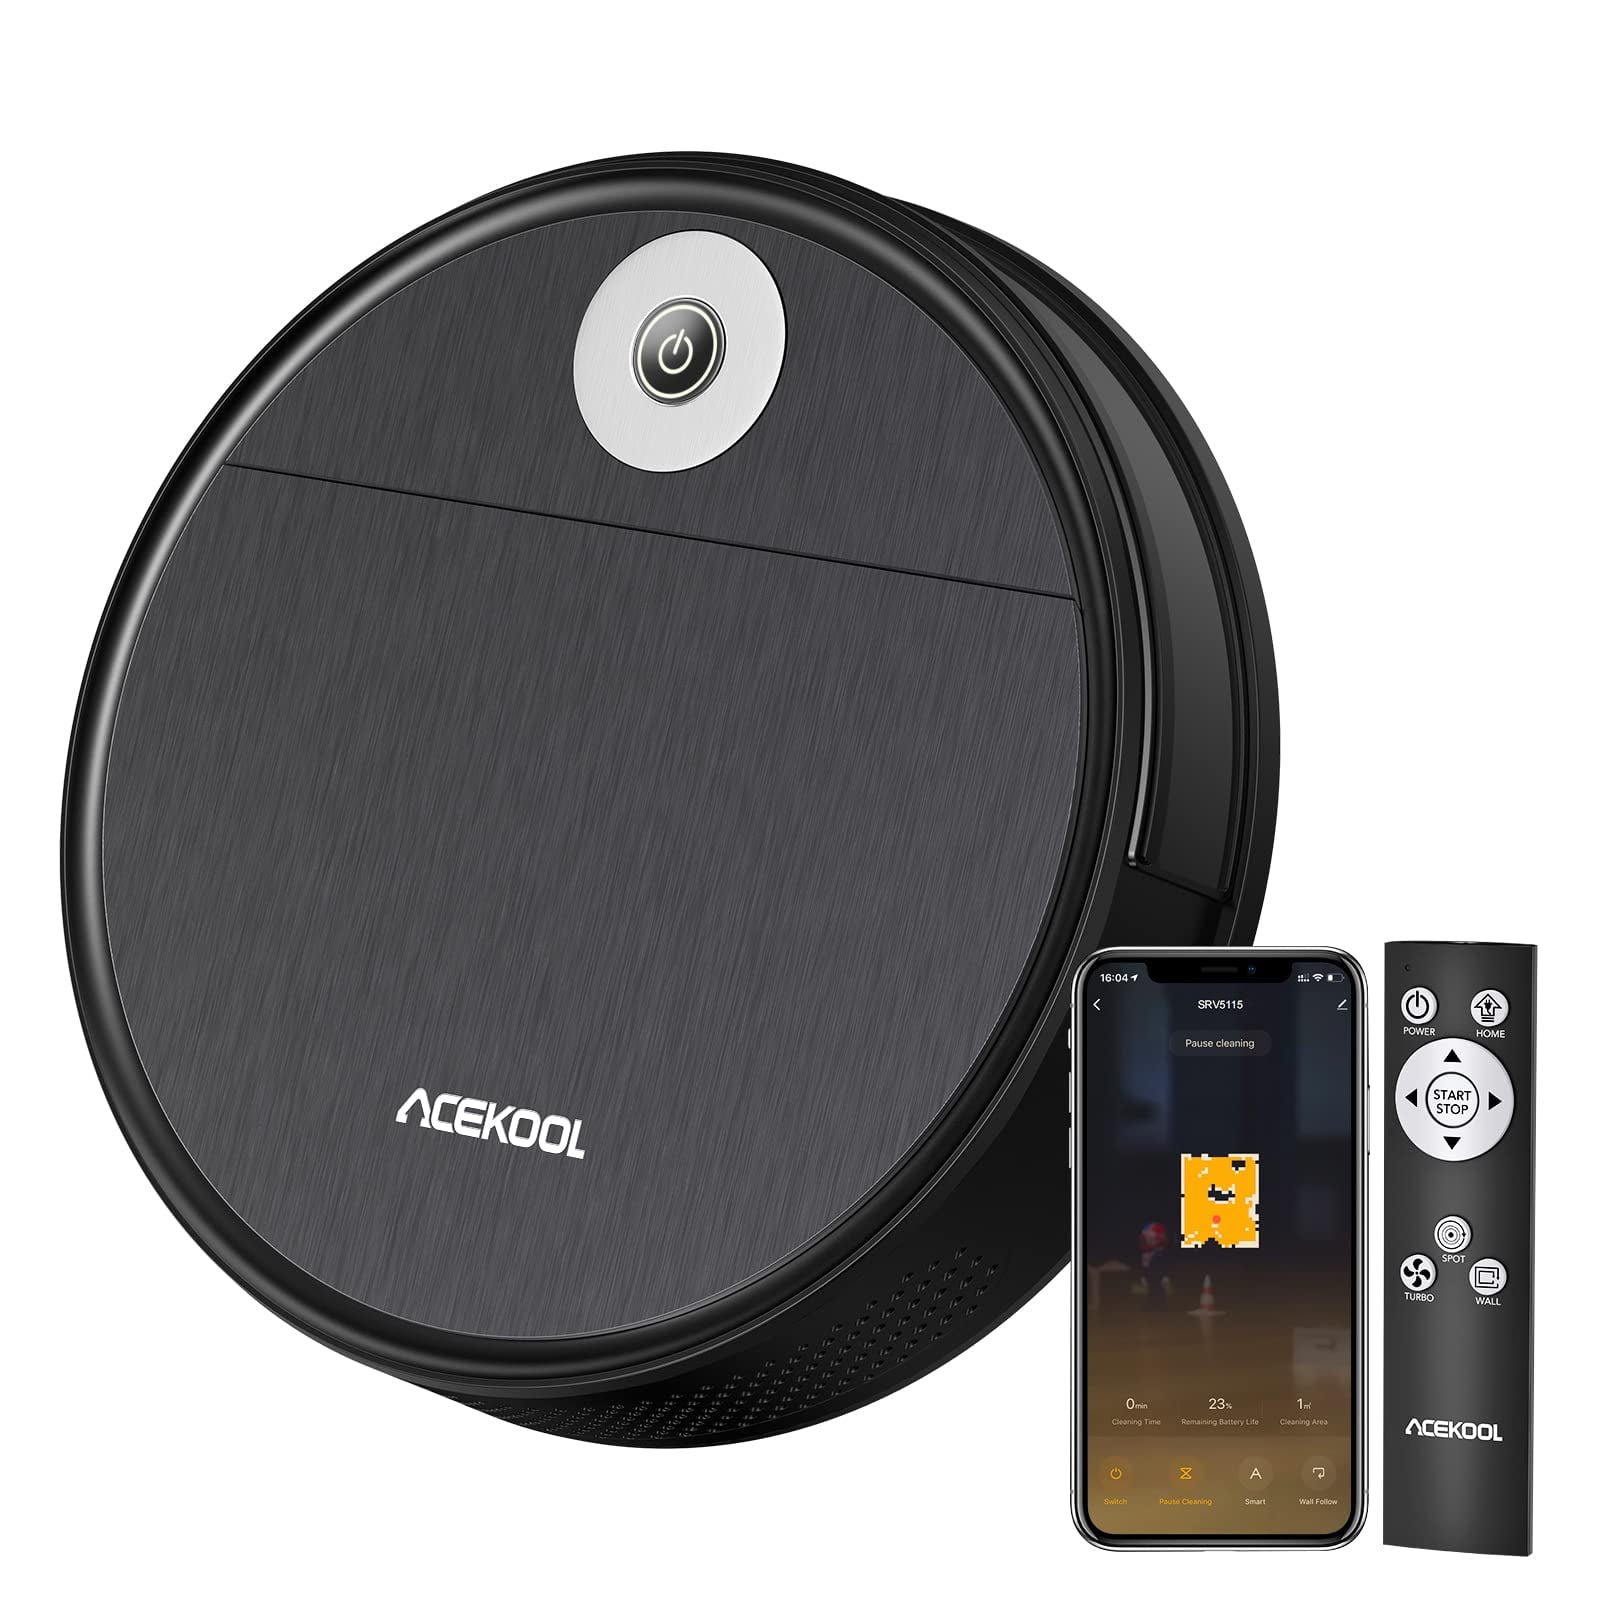 Wi-Fi Connected Robot Vacuum Hard Floors to Carpet 1400Pa Strong Suction Works with Alexa Smart Navigating Robot Vacuum Cleaner Visual Mapping Best for Pet Hair Self-Charging APP Controls 